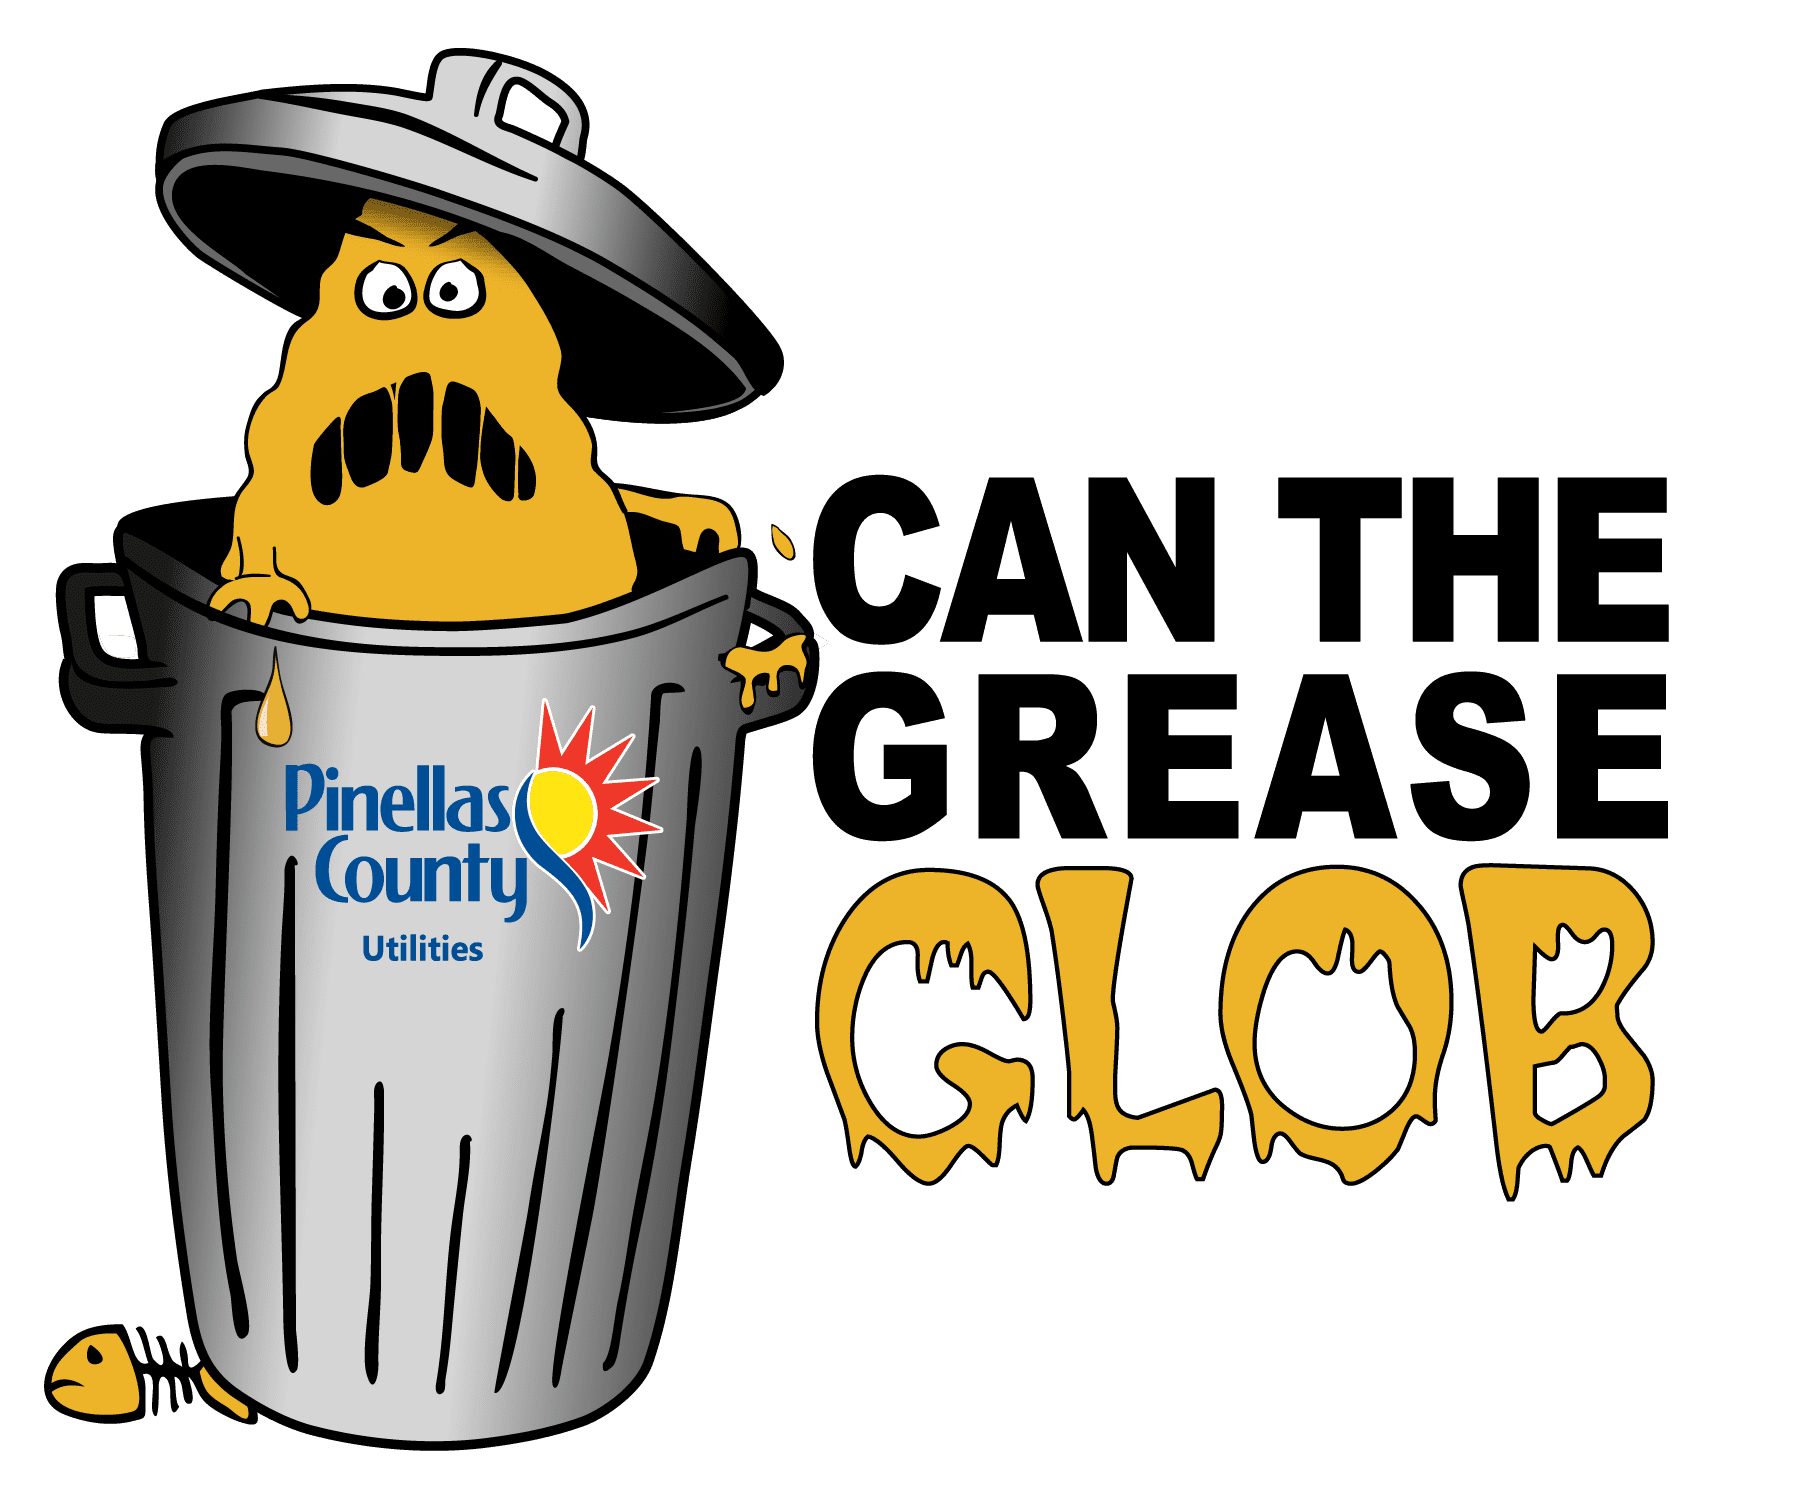 https://pinellas.gov/wp-content/uploads/2021/10/Grease_can.png